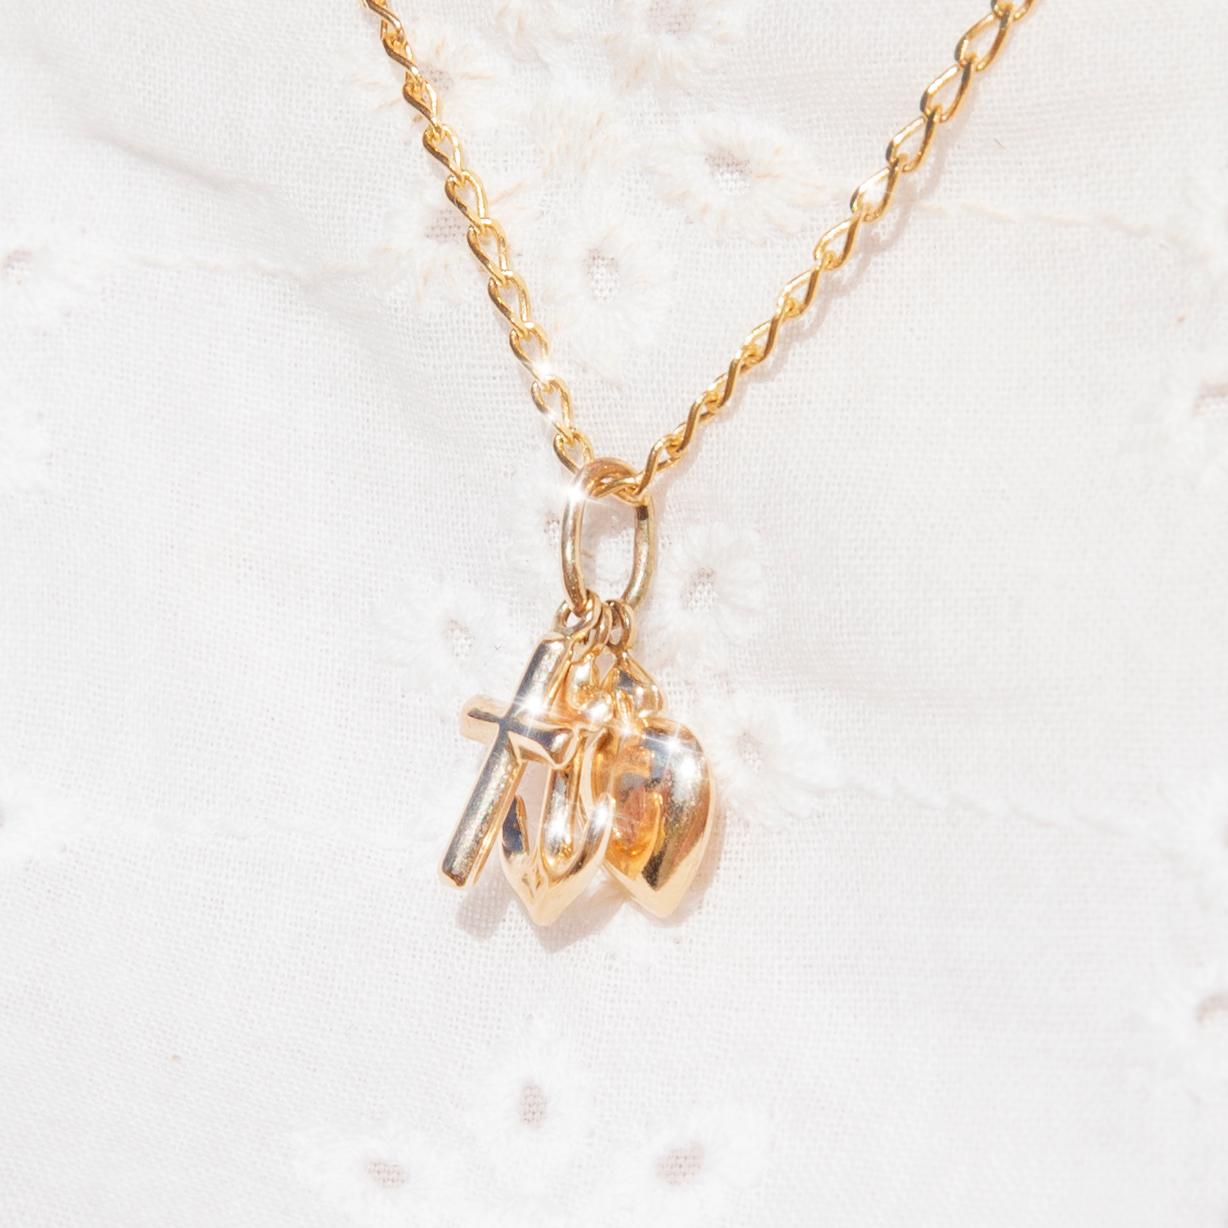 Forged in 9 carat yellow gold, this whimsical vintage piece, circa 1980s, features three pendants - a heart, a cross, and an anchor - threaded on a fine 9 carat gold curb-link chain. We have named this darling piece The Nyra Pendants & Chain. Her